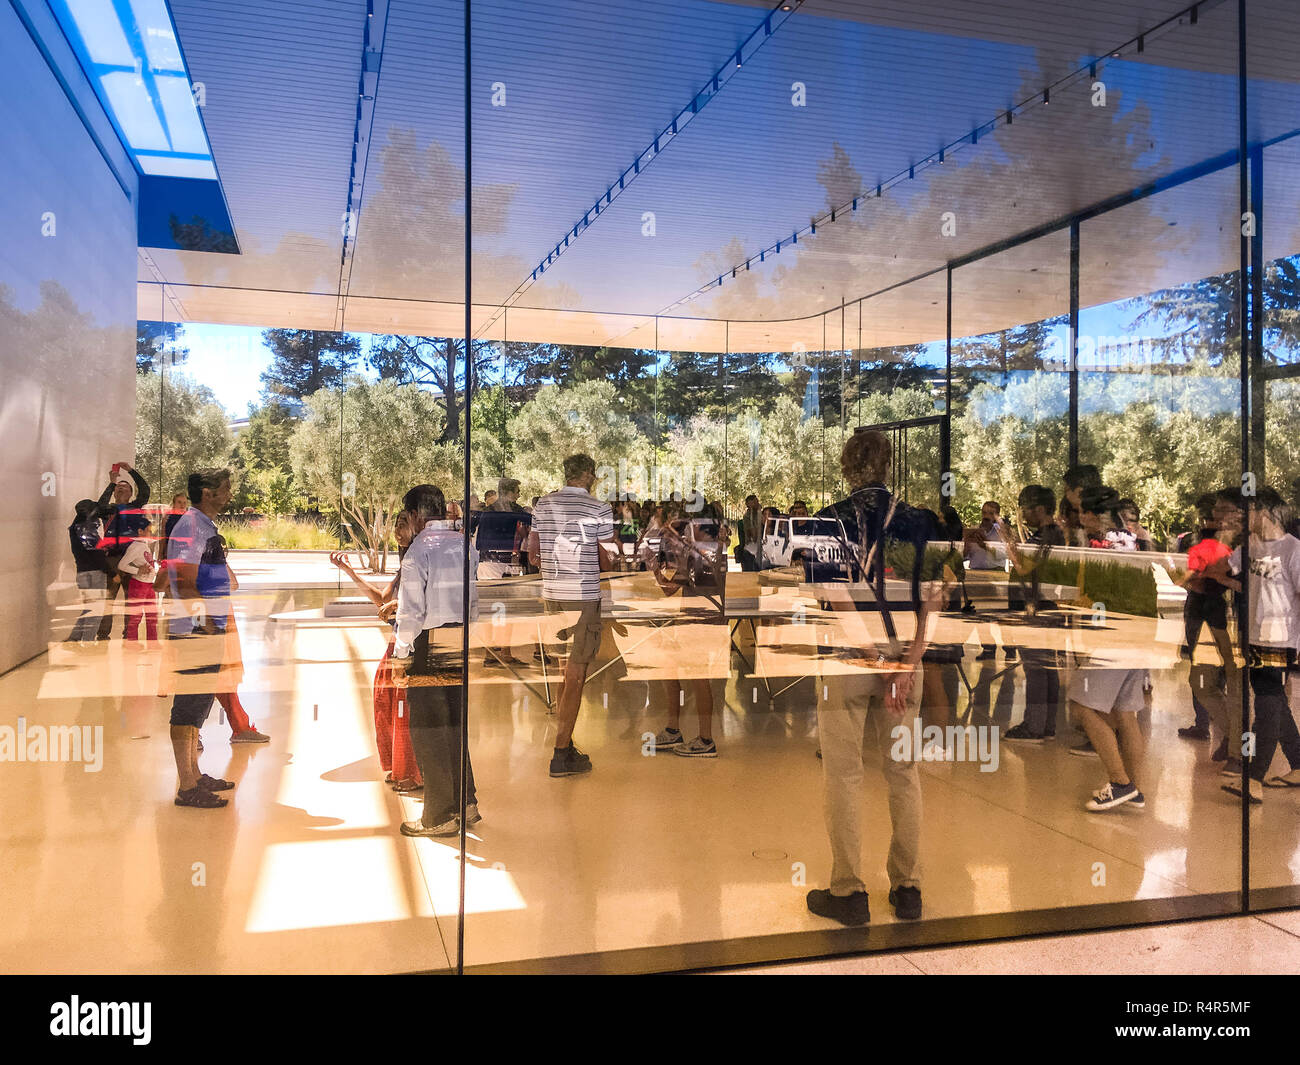 Apple Visitor Center, 1 Apple Park Way, San Jose, California, United States (USA) - August 5, 2018: Guest customers are interested of Apple products Stock Photo